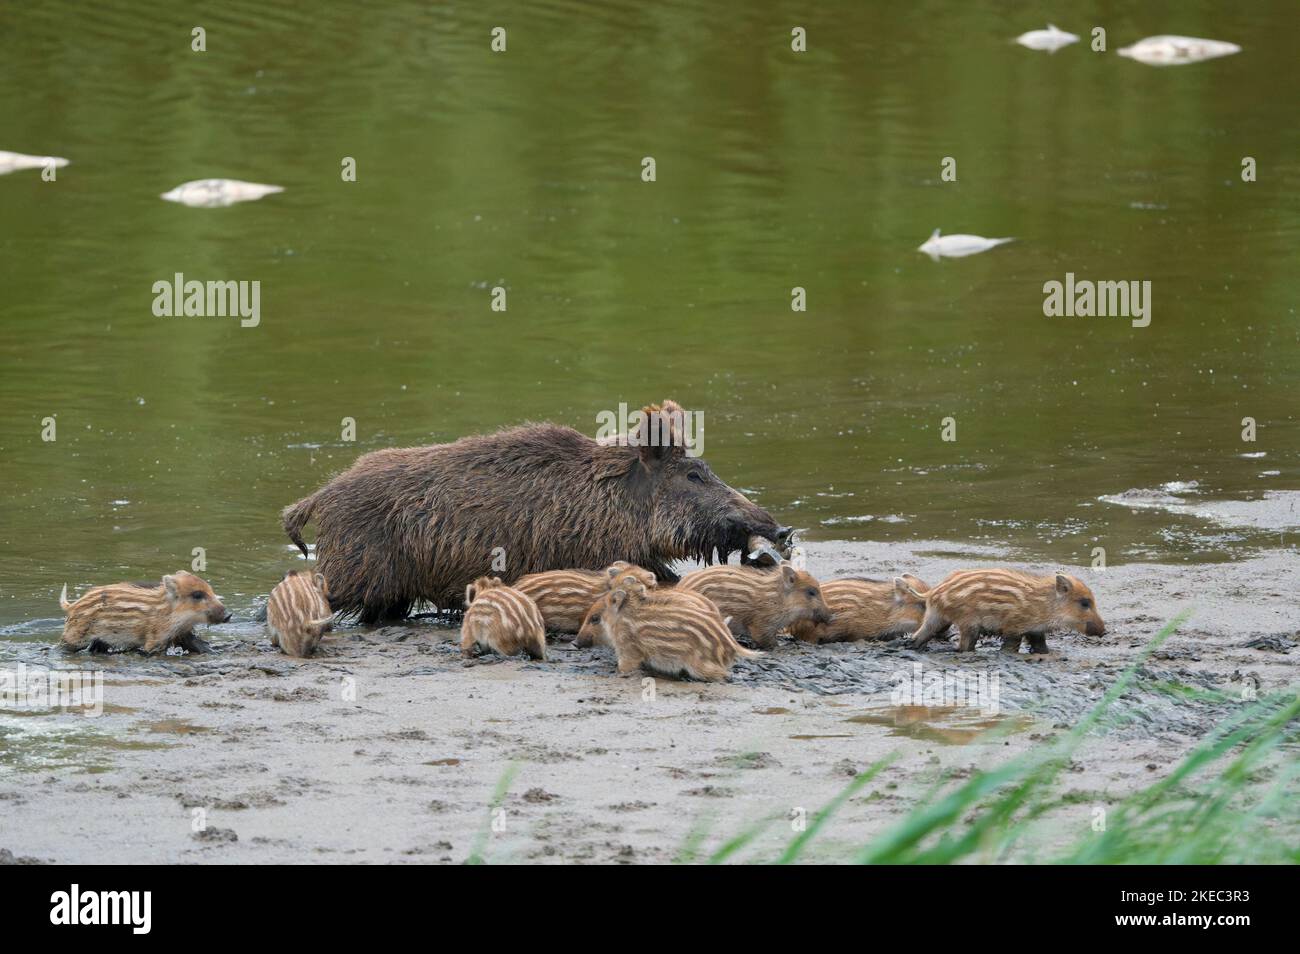 Wild boar (Sus scrofa) with a dead fish (bream) in the pen, in the background more dead fish, brook, freshets, May, summer, Hesse, Germany, Europe Stock Photo